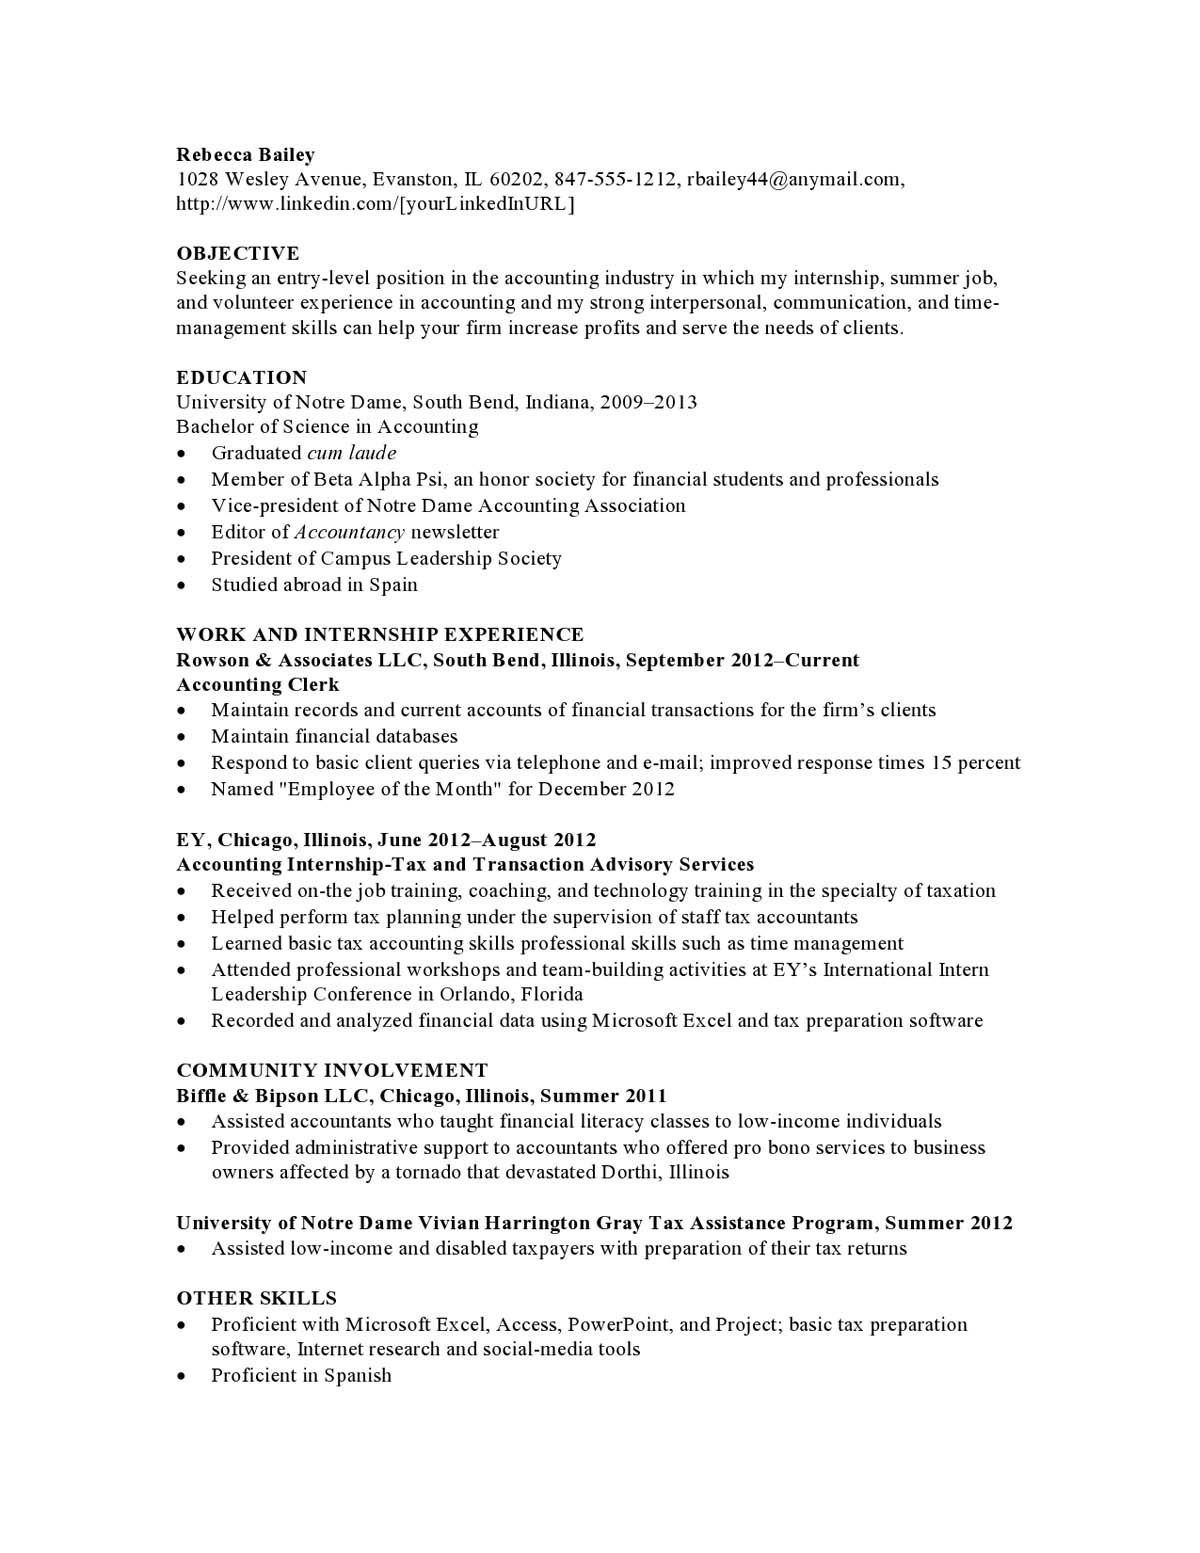 Employee Of the Month Resume Sample Resume Samples Templates Examples Vault.com